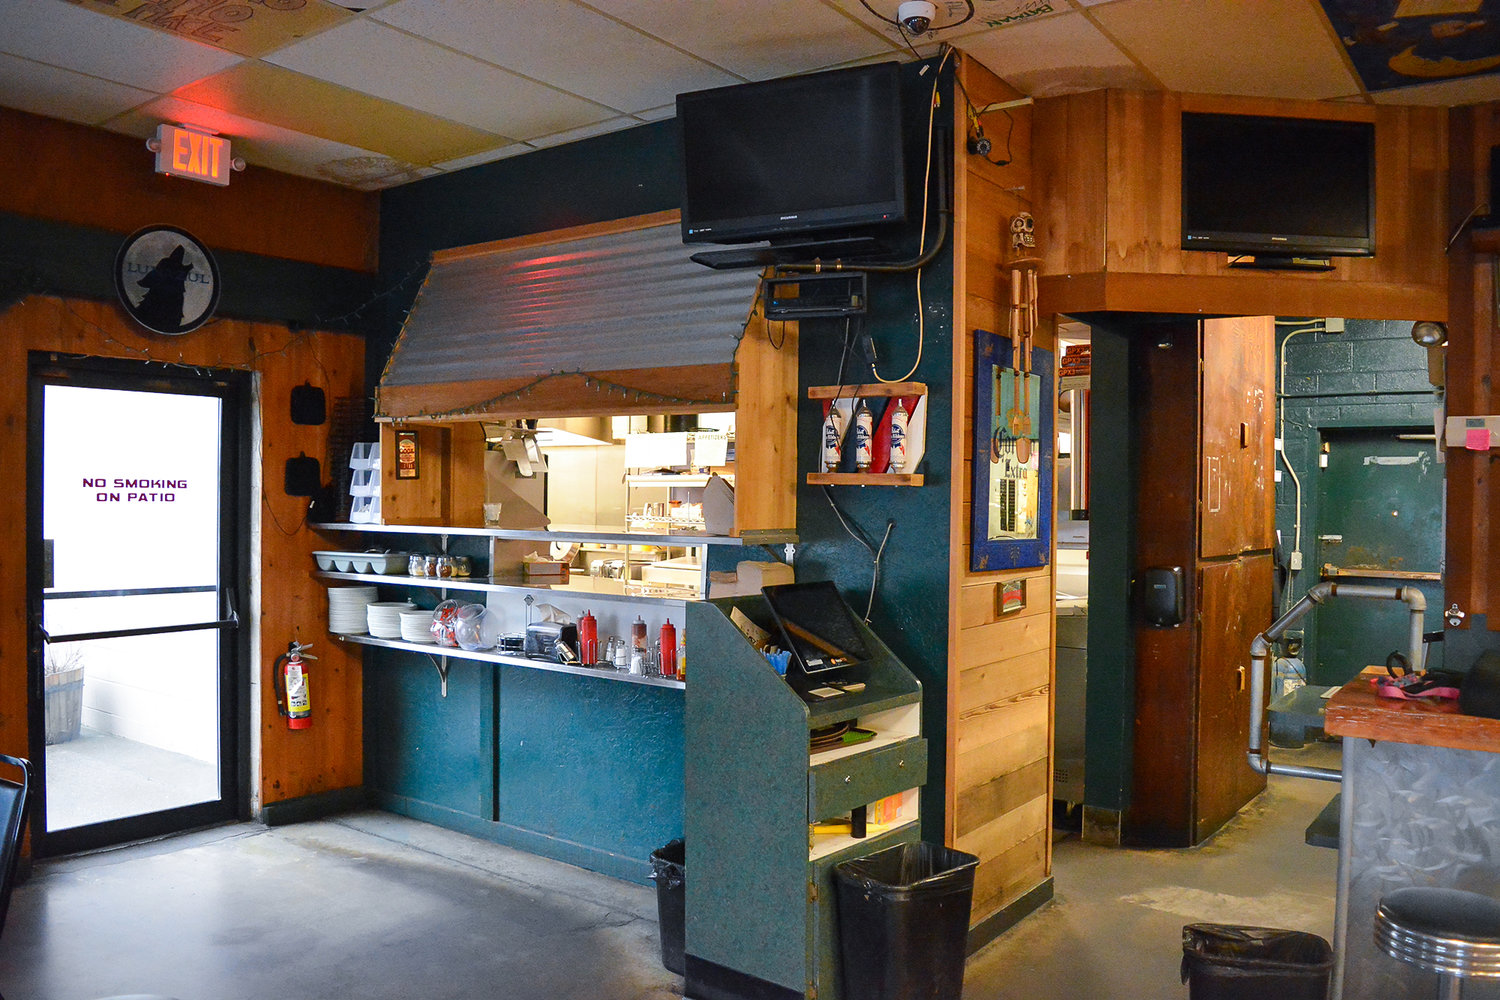 The Prairie Bar and Grill’s kitchen area is pictured.